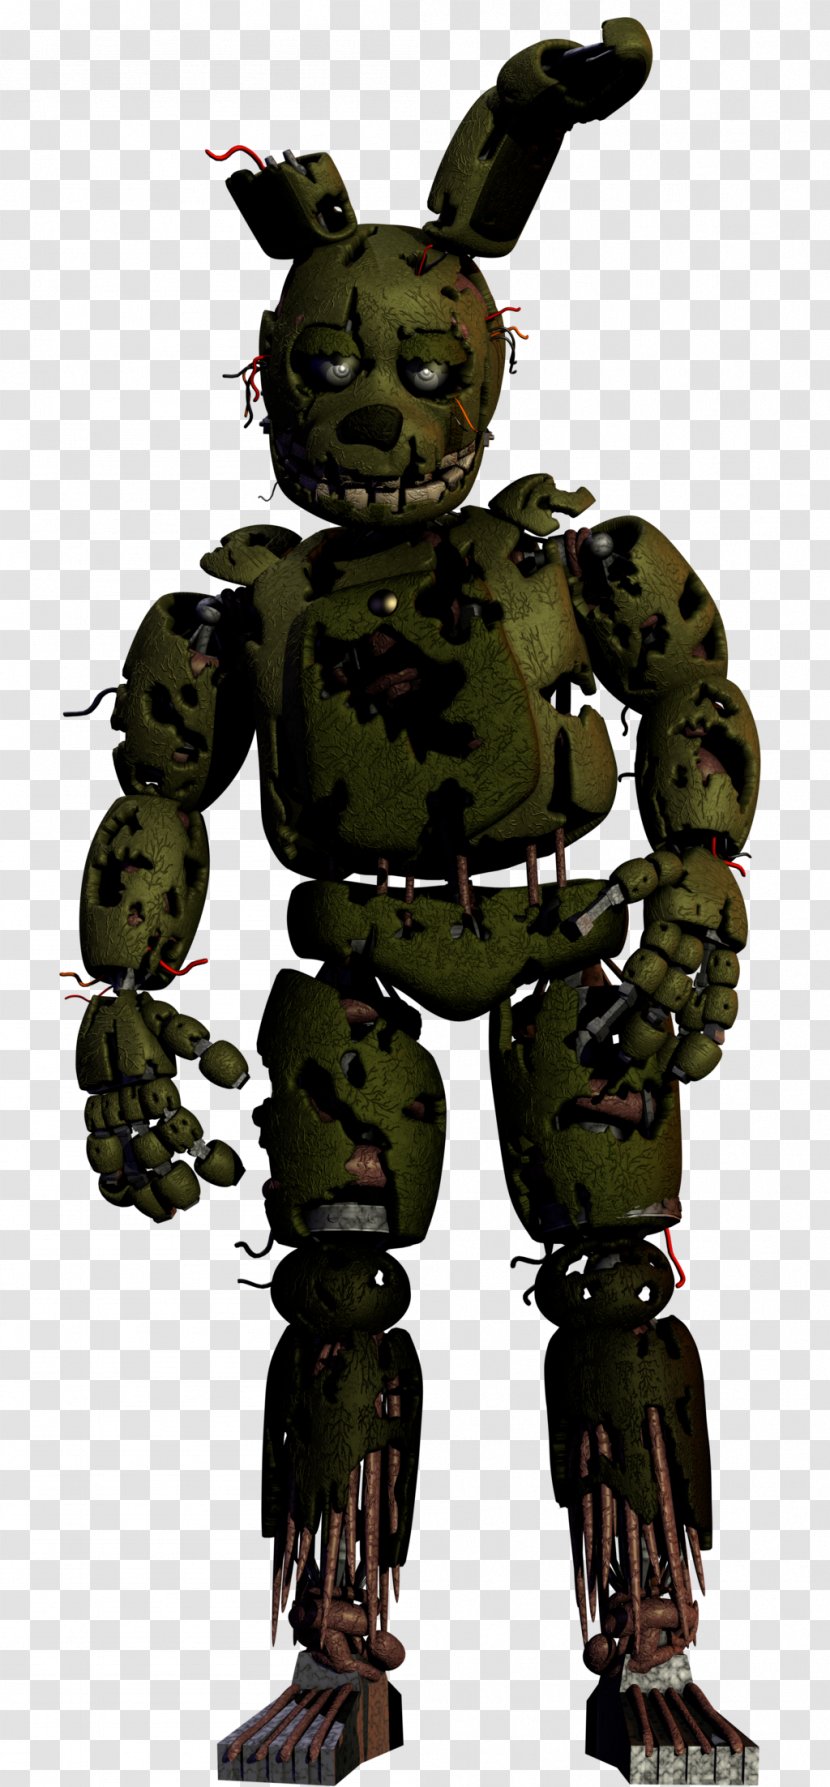 Five Nights At Freddy's 3 2 4 Animatronics - Film - Baby Costume Transparent PNG